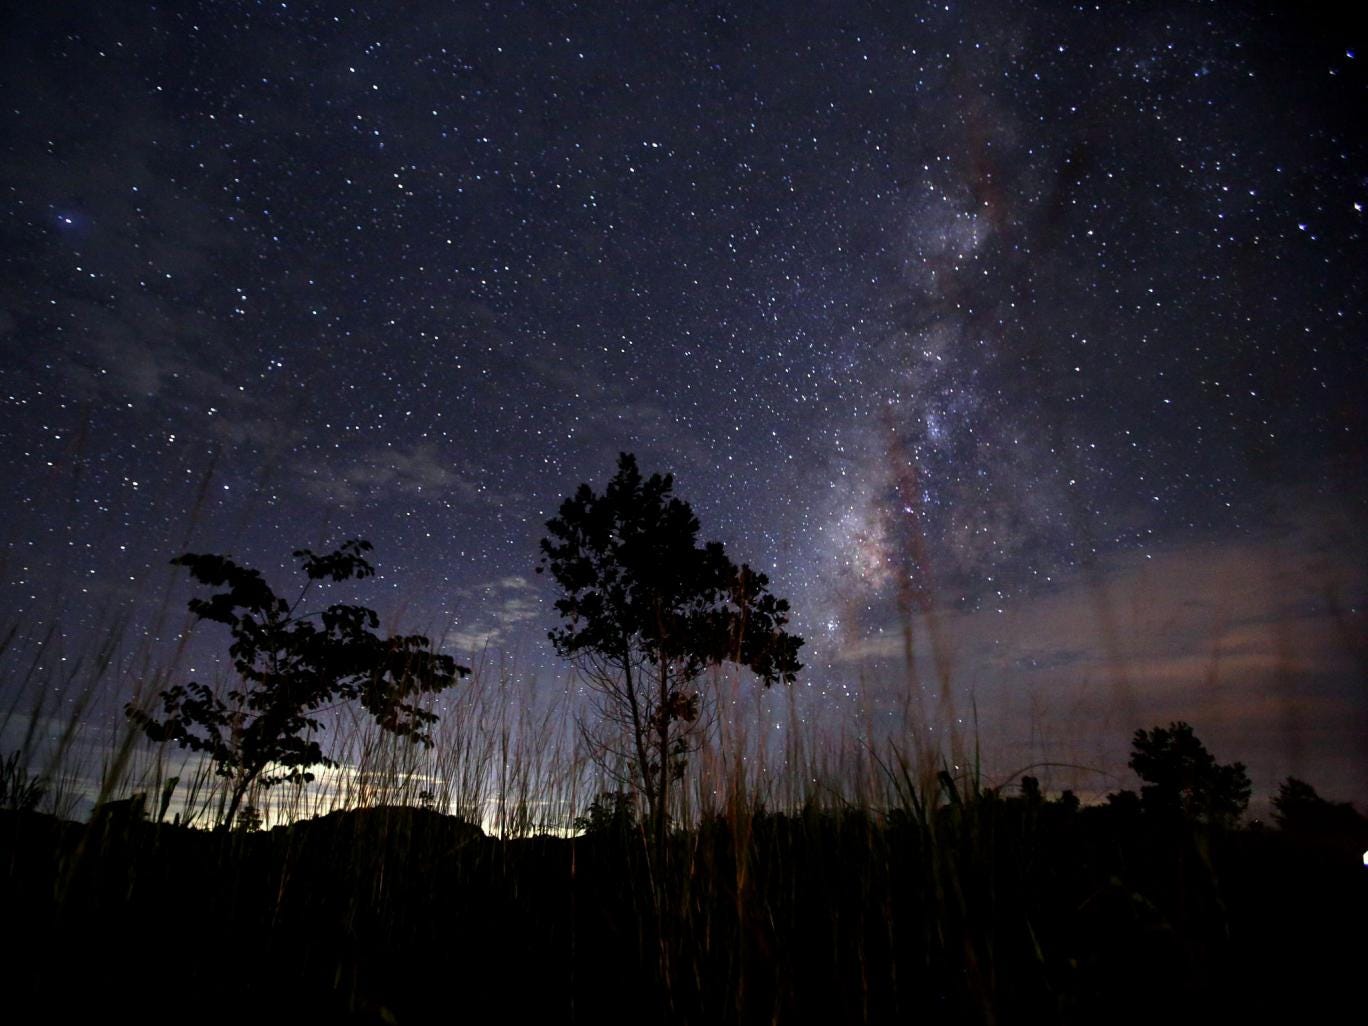 This long-exposure photograph taken on August 12, 2013 shows the Milky Way in the clear night sky near Yangon. The Perseid meteor shower occurs every year in August when the Earth passes through the debris and dust of the Swift-Tuttle comet.